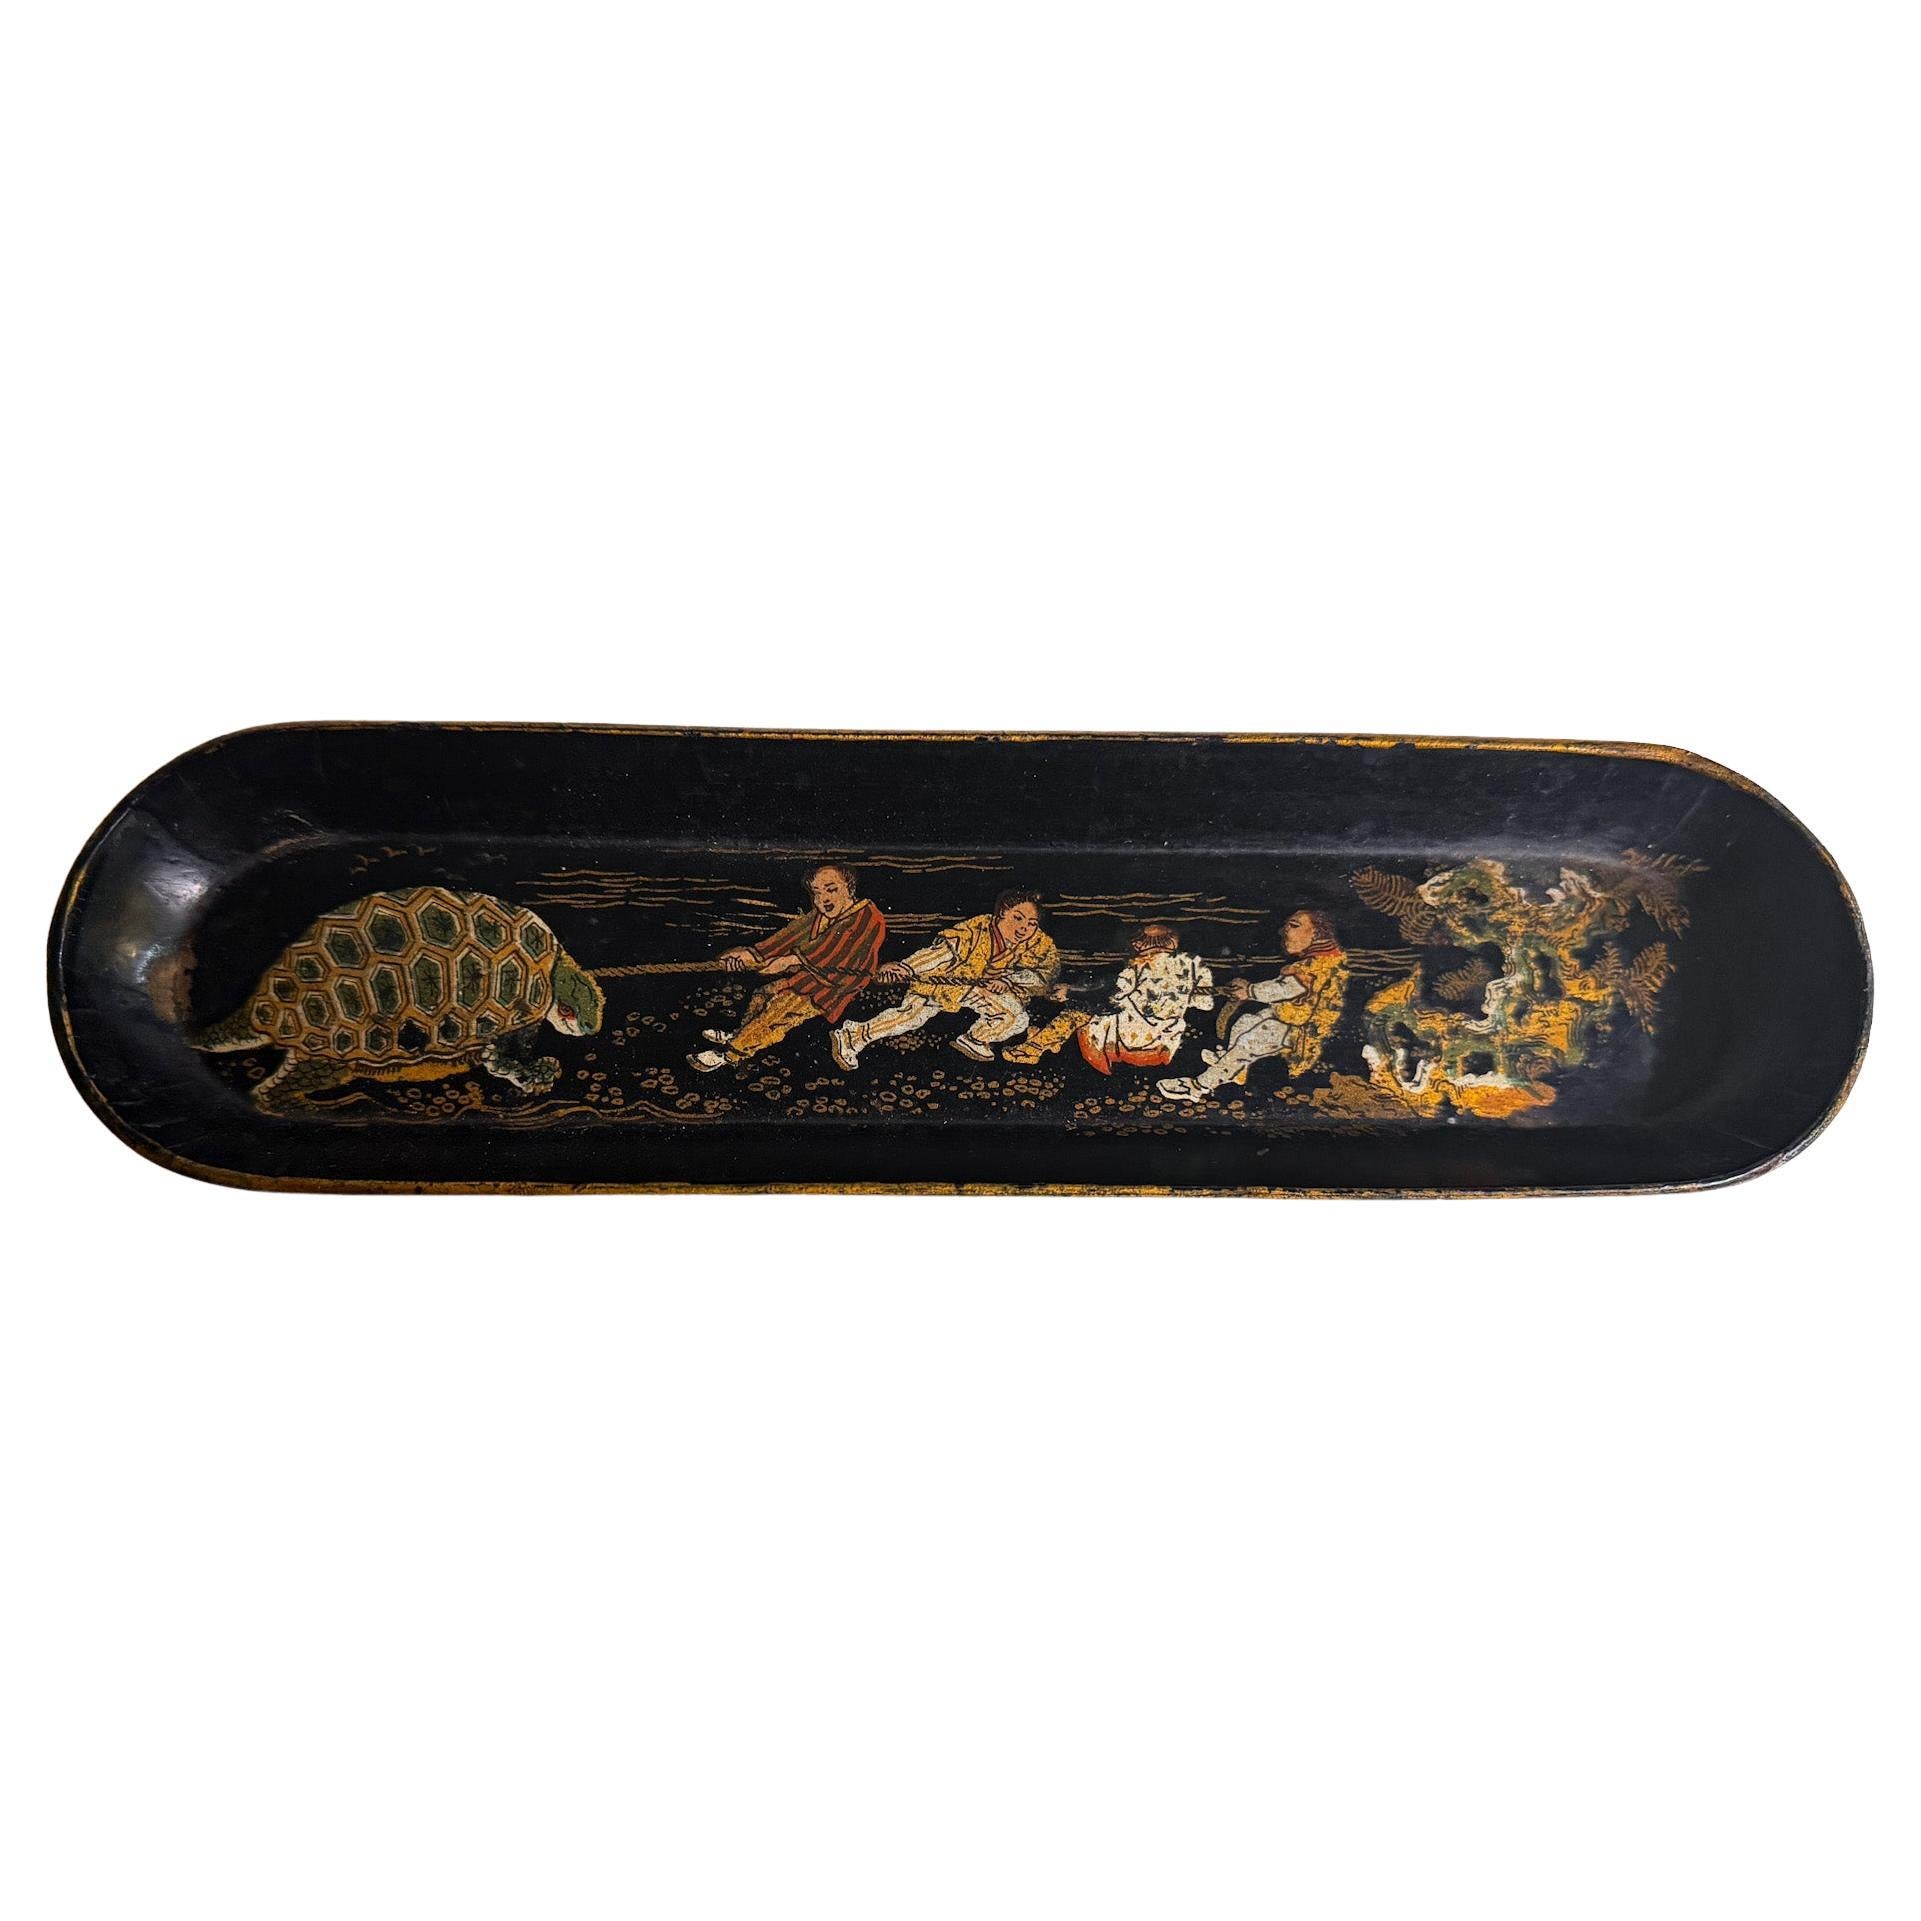 Wood Pen Holder, Black and gold Color Japan 19th Century